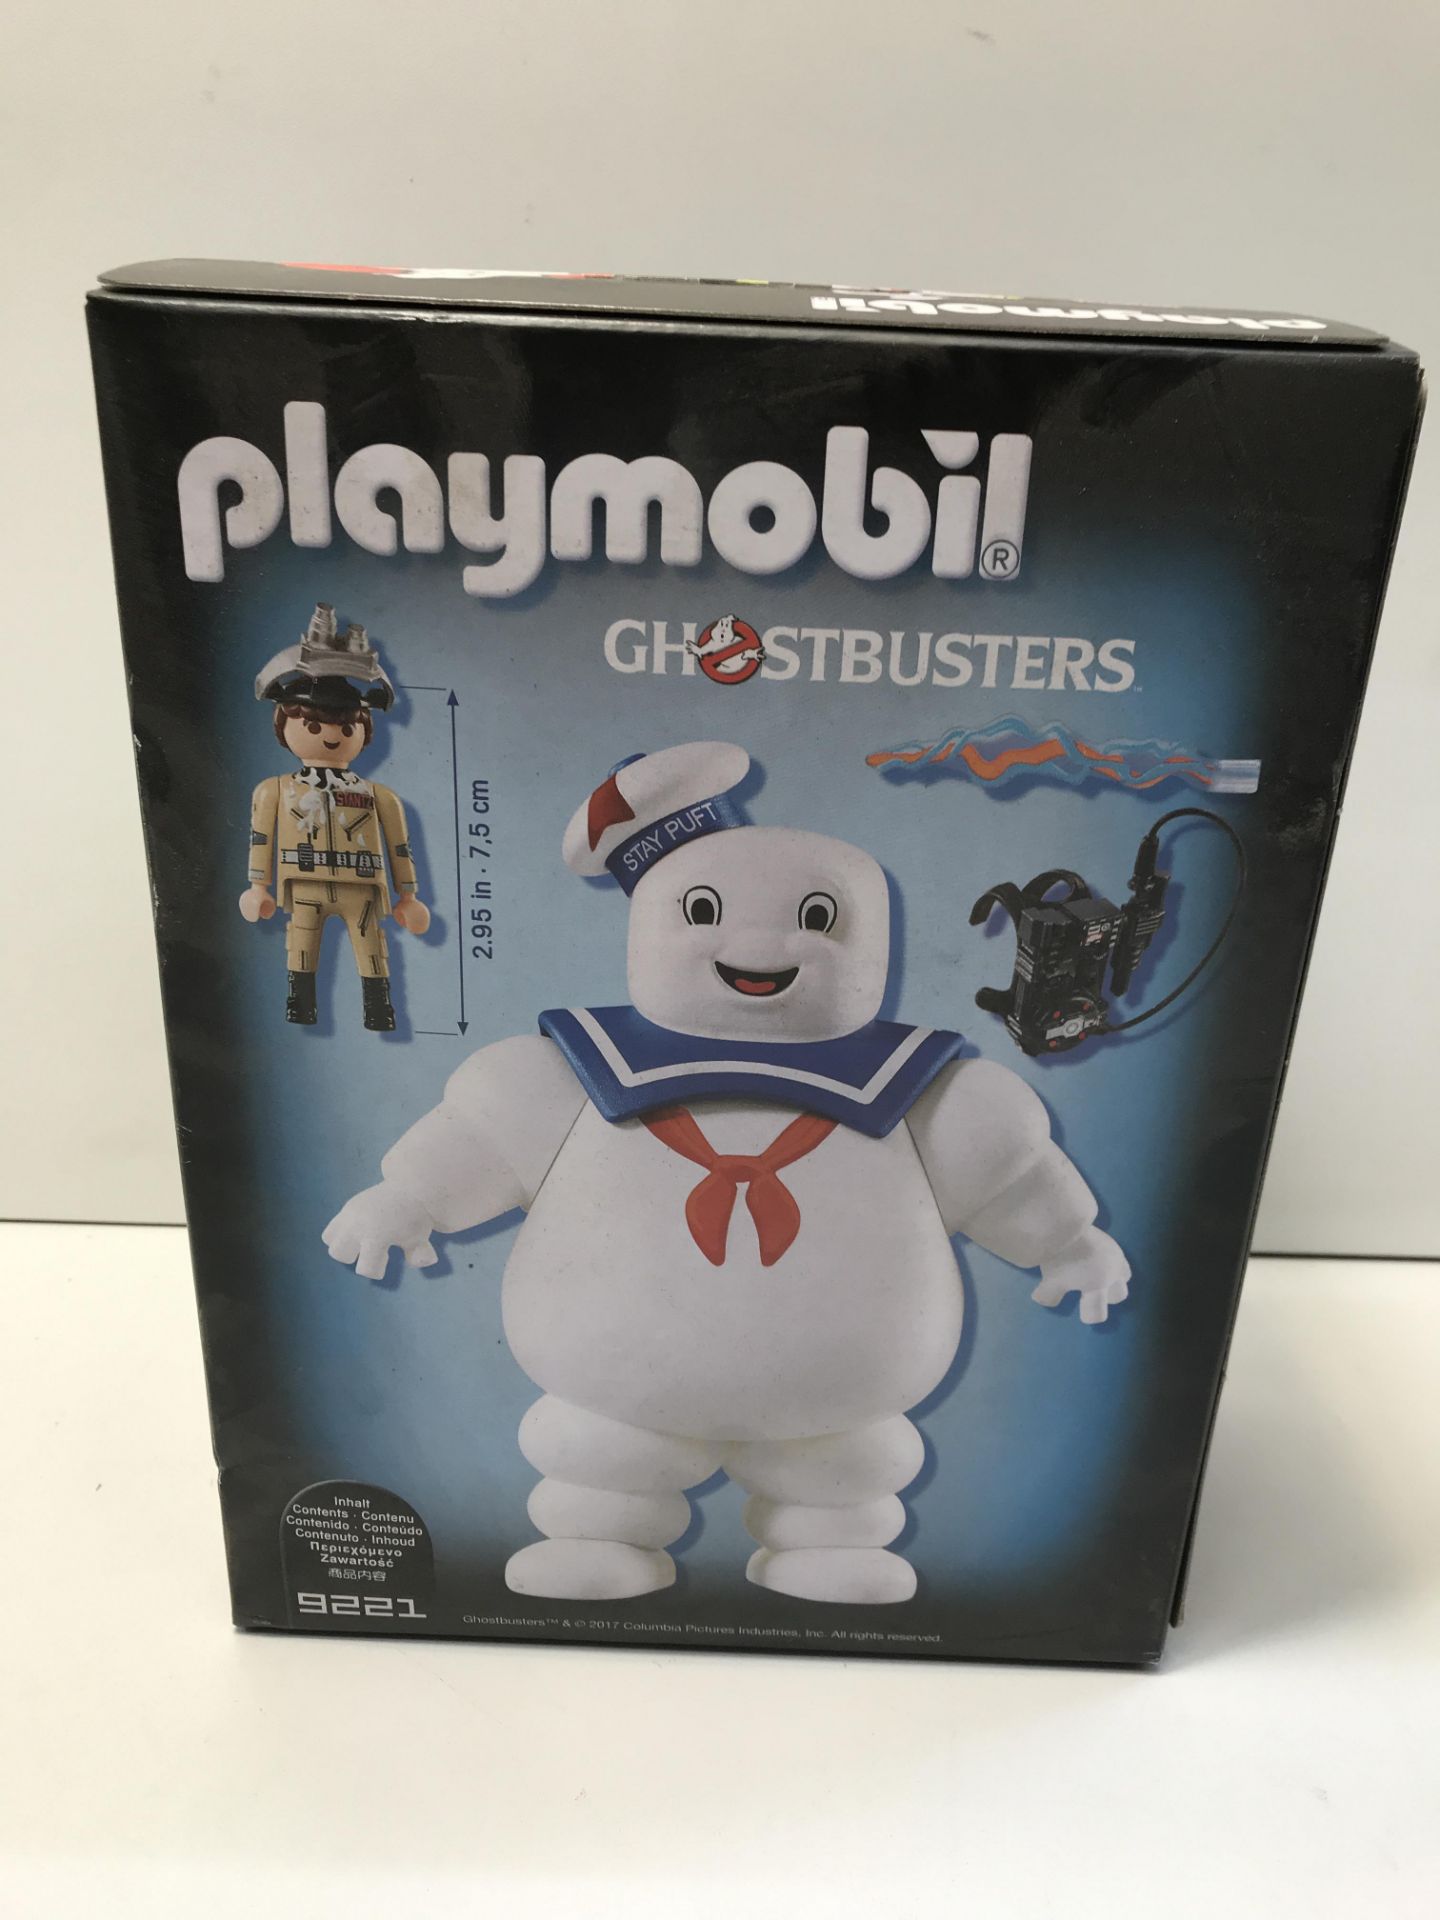 1 x Playmobil Ghostbusters 70172 Collection Figure P. Venkman for Children Ages 6+ |4008789092212 - Image 2 of 3